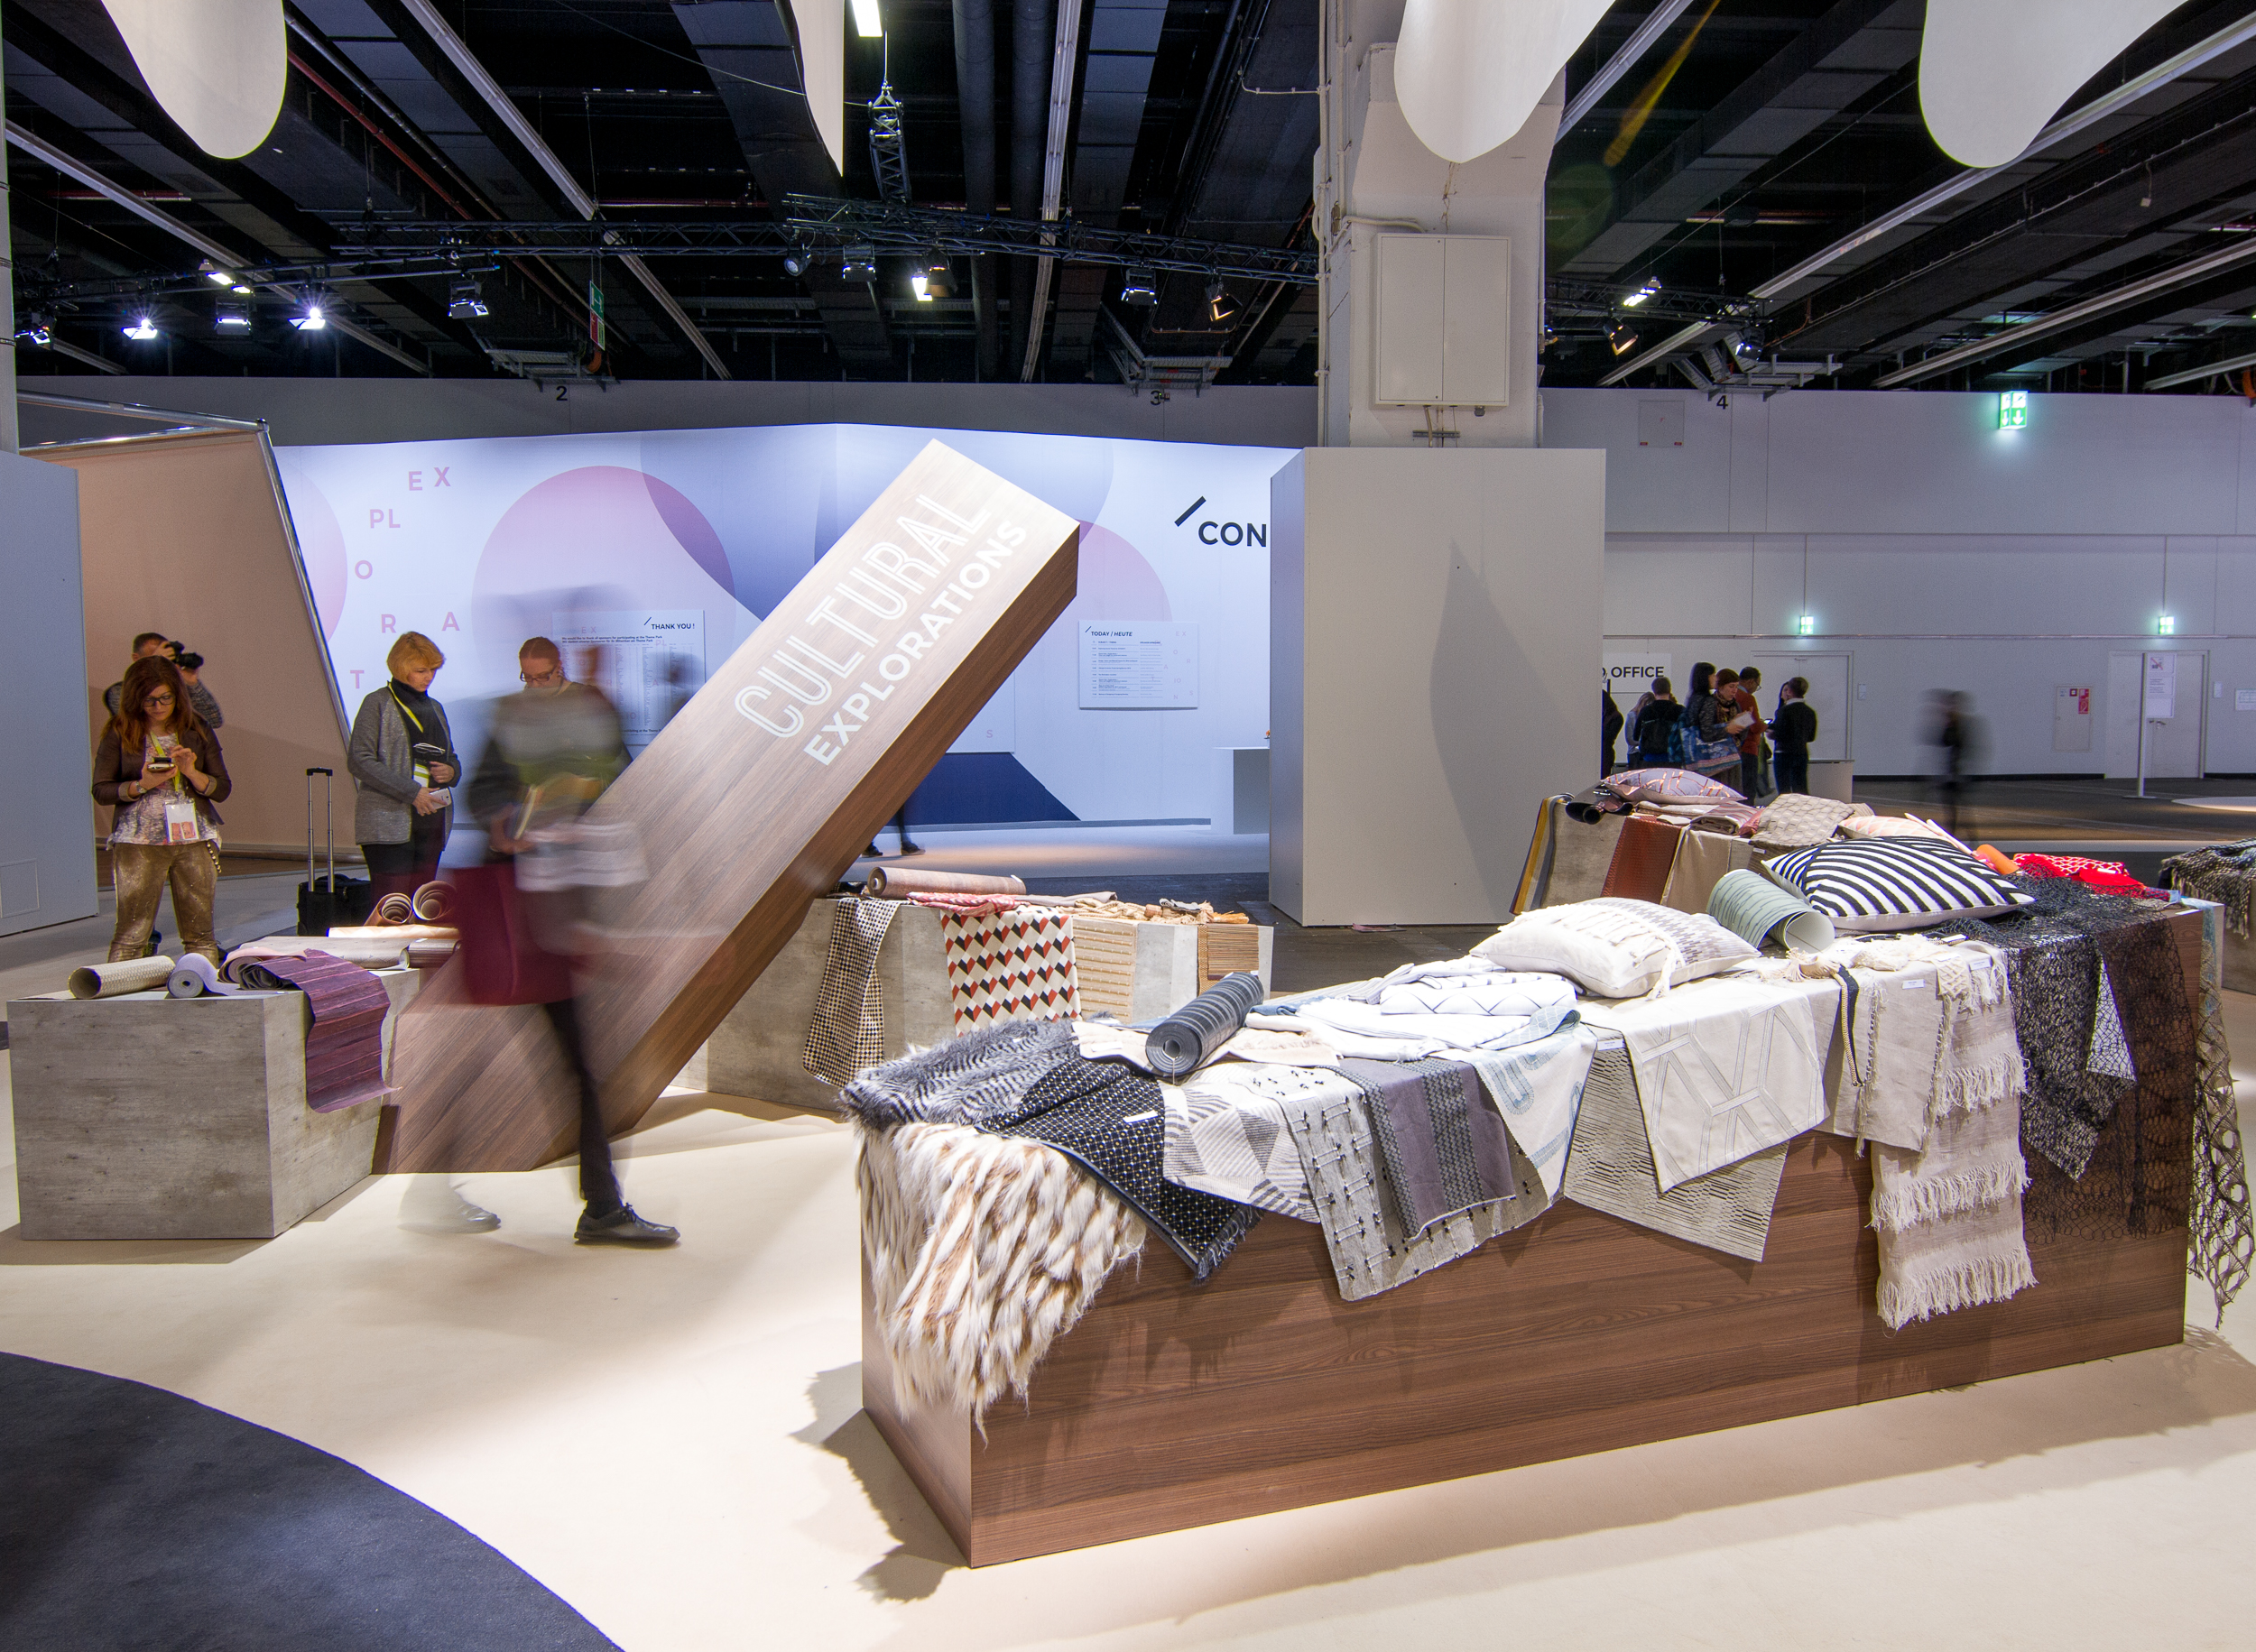  Heimtextil's Theme Park is organized into different experiential areas based on the trend forecasters' vision.&nbsp; 